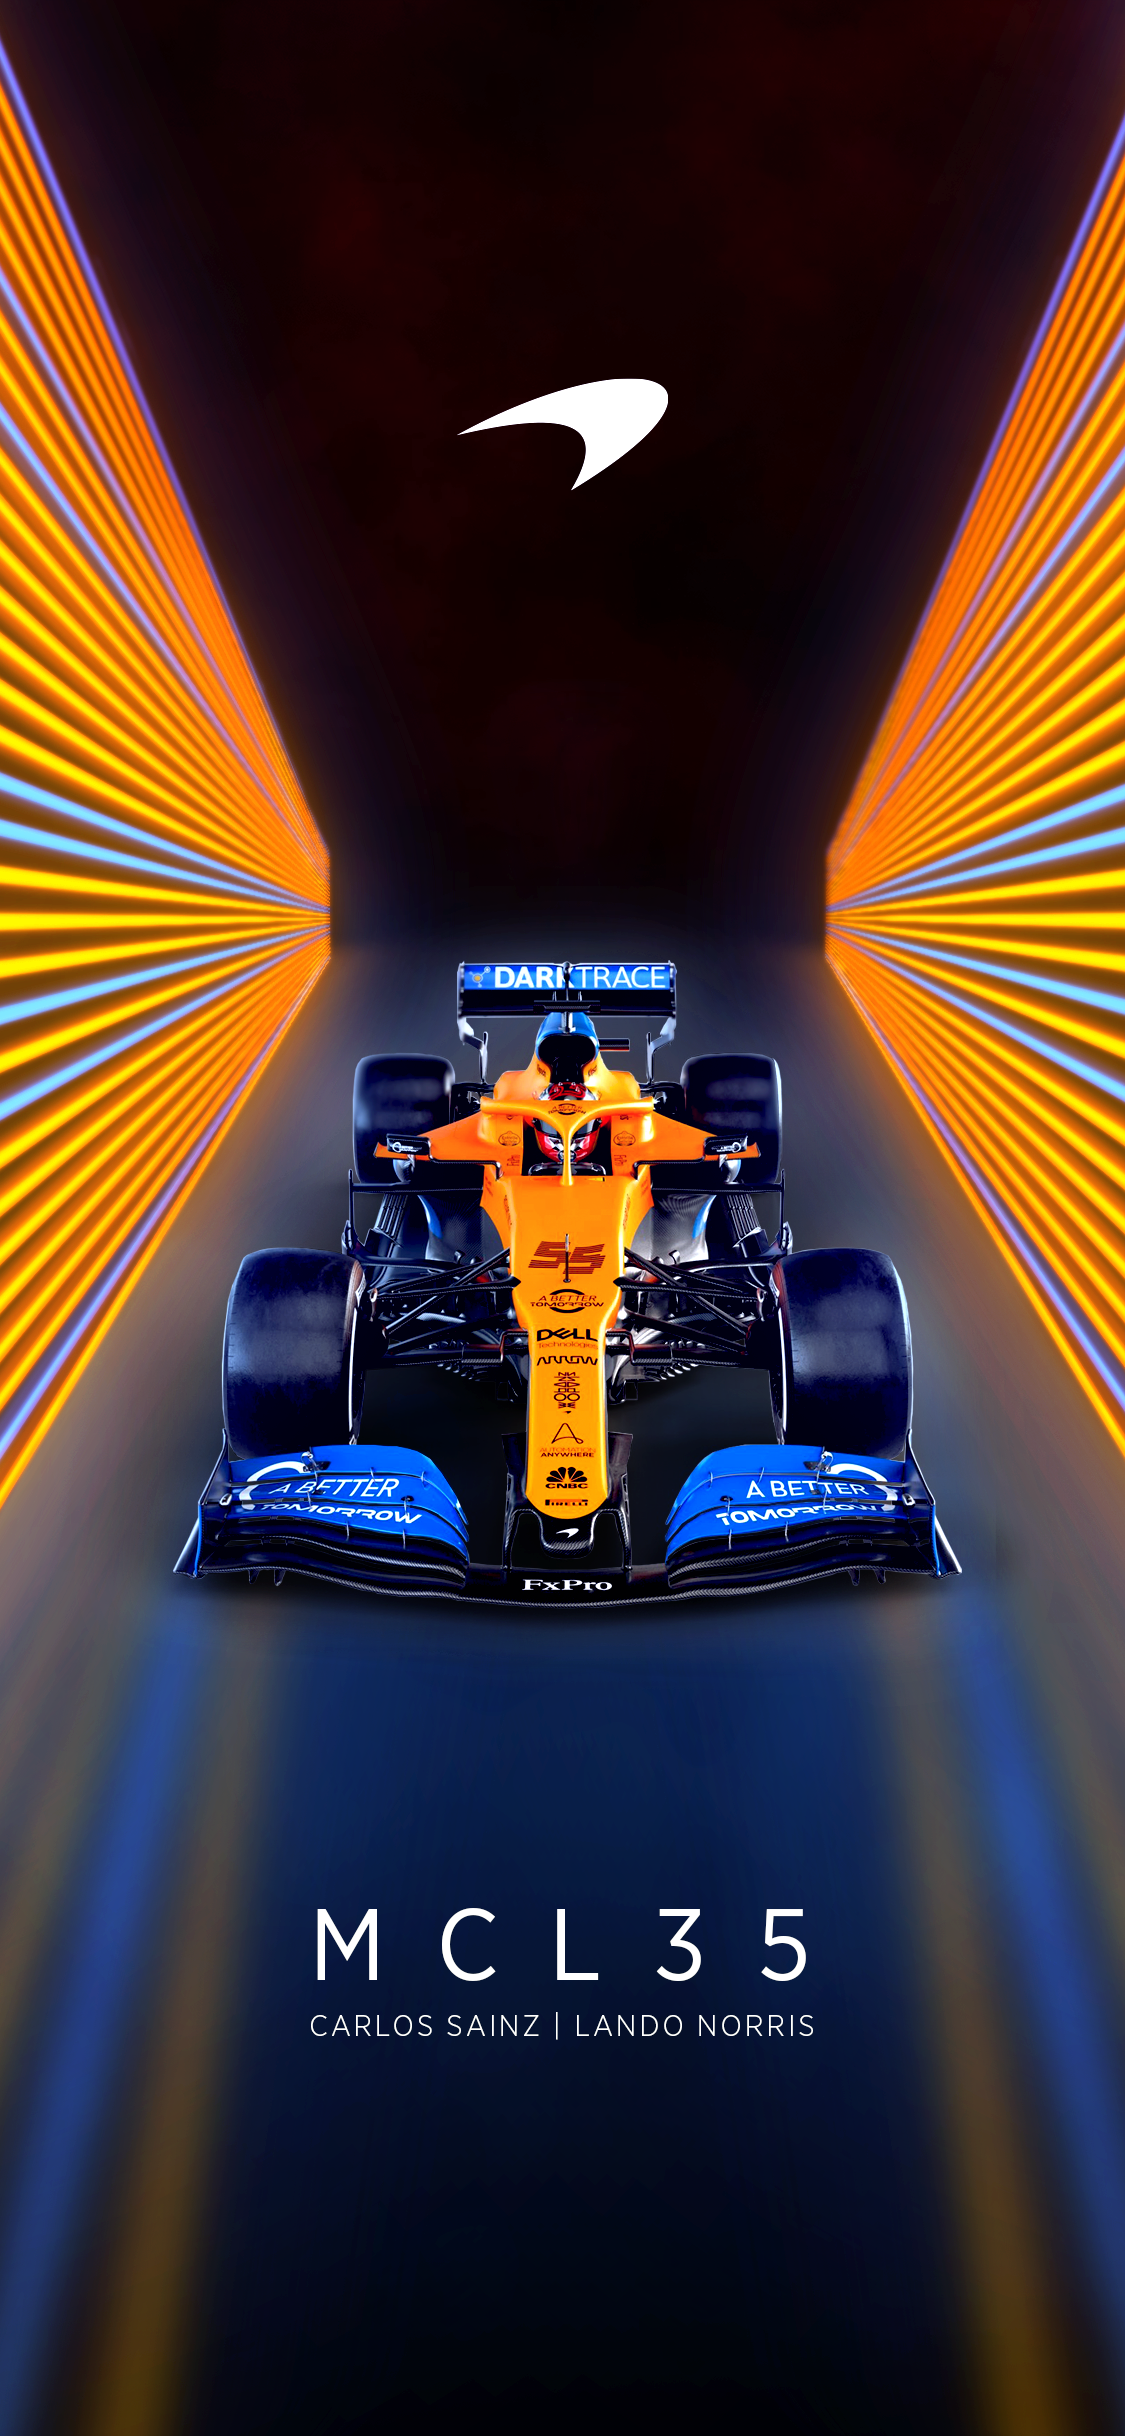 Red Bull F1 Racing Wallpapers  Top 30 Best Red Bull F1 Racing Wallpapers  Download